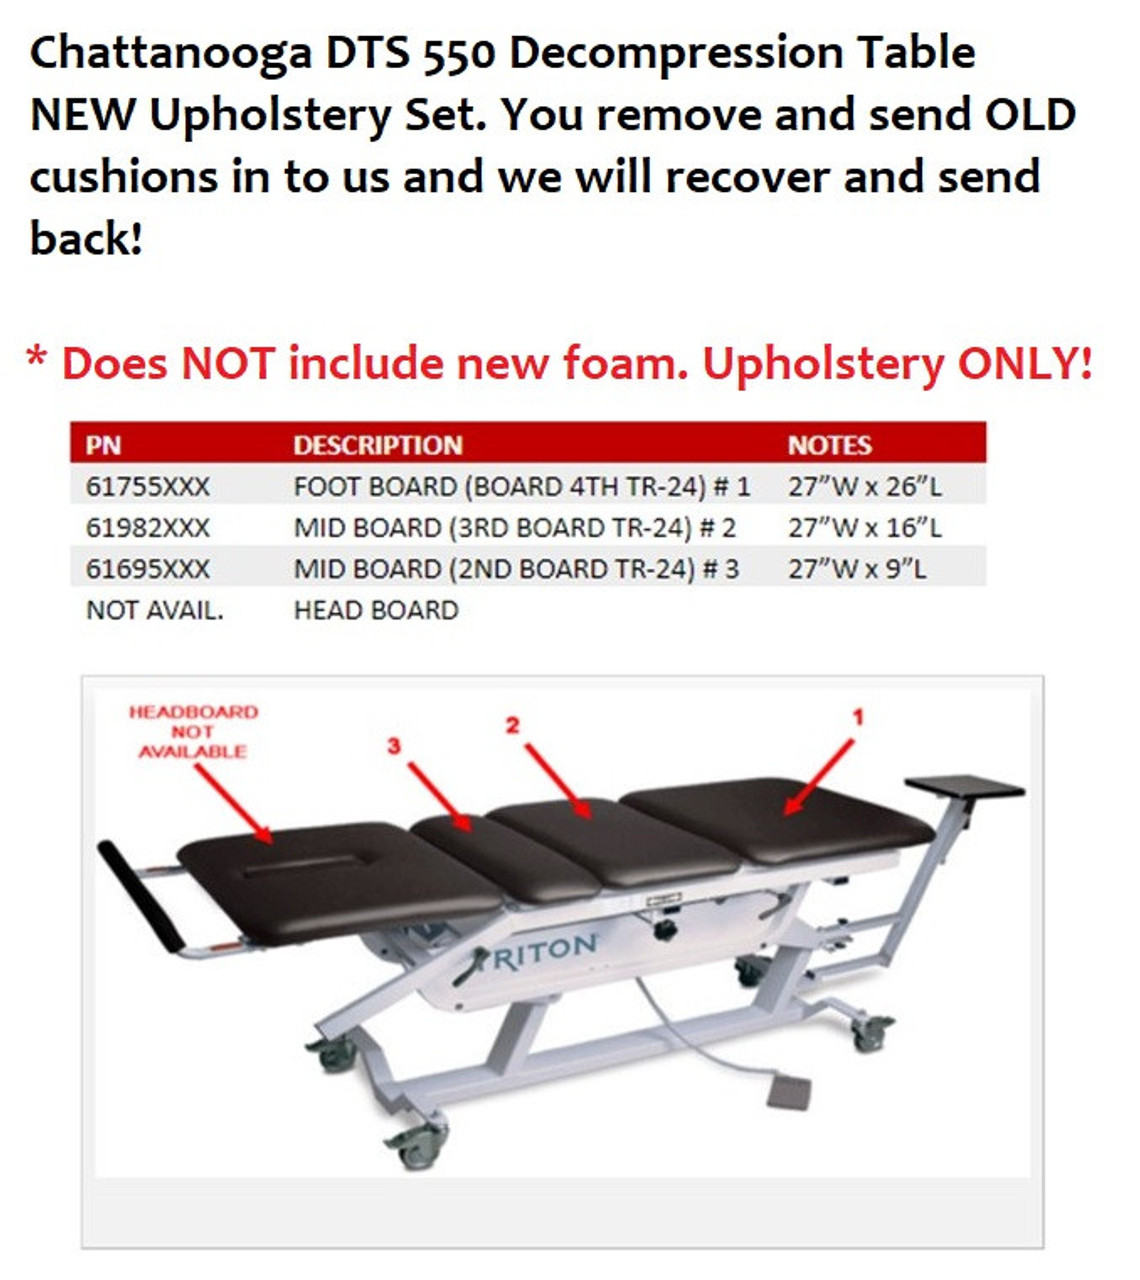 Chattanooga DTS 550 Decompression Table Upholstery Set